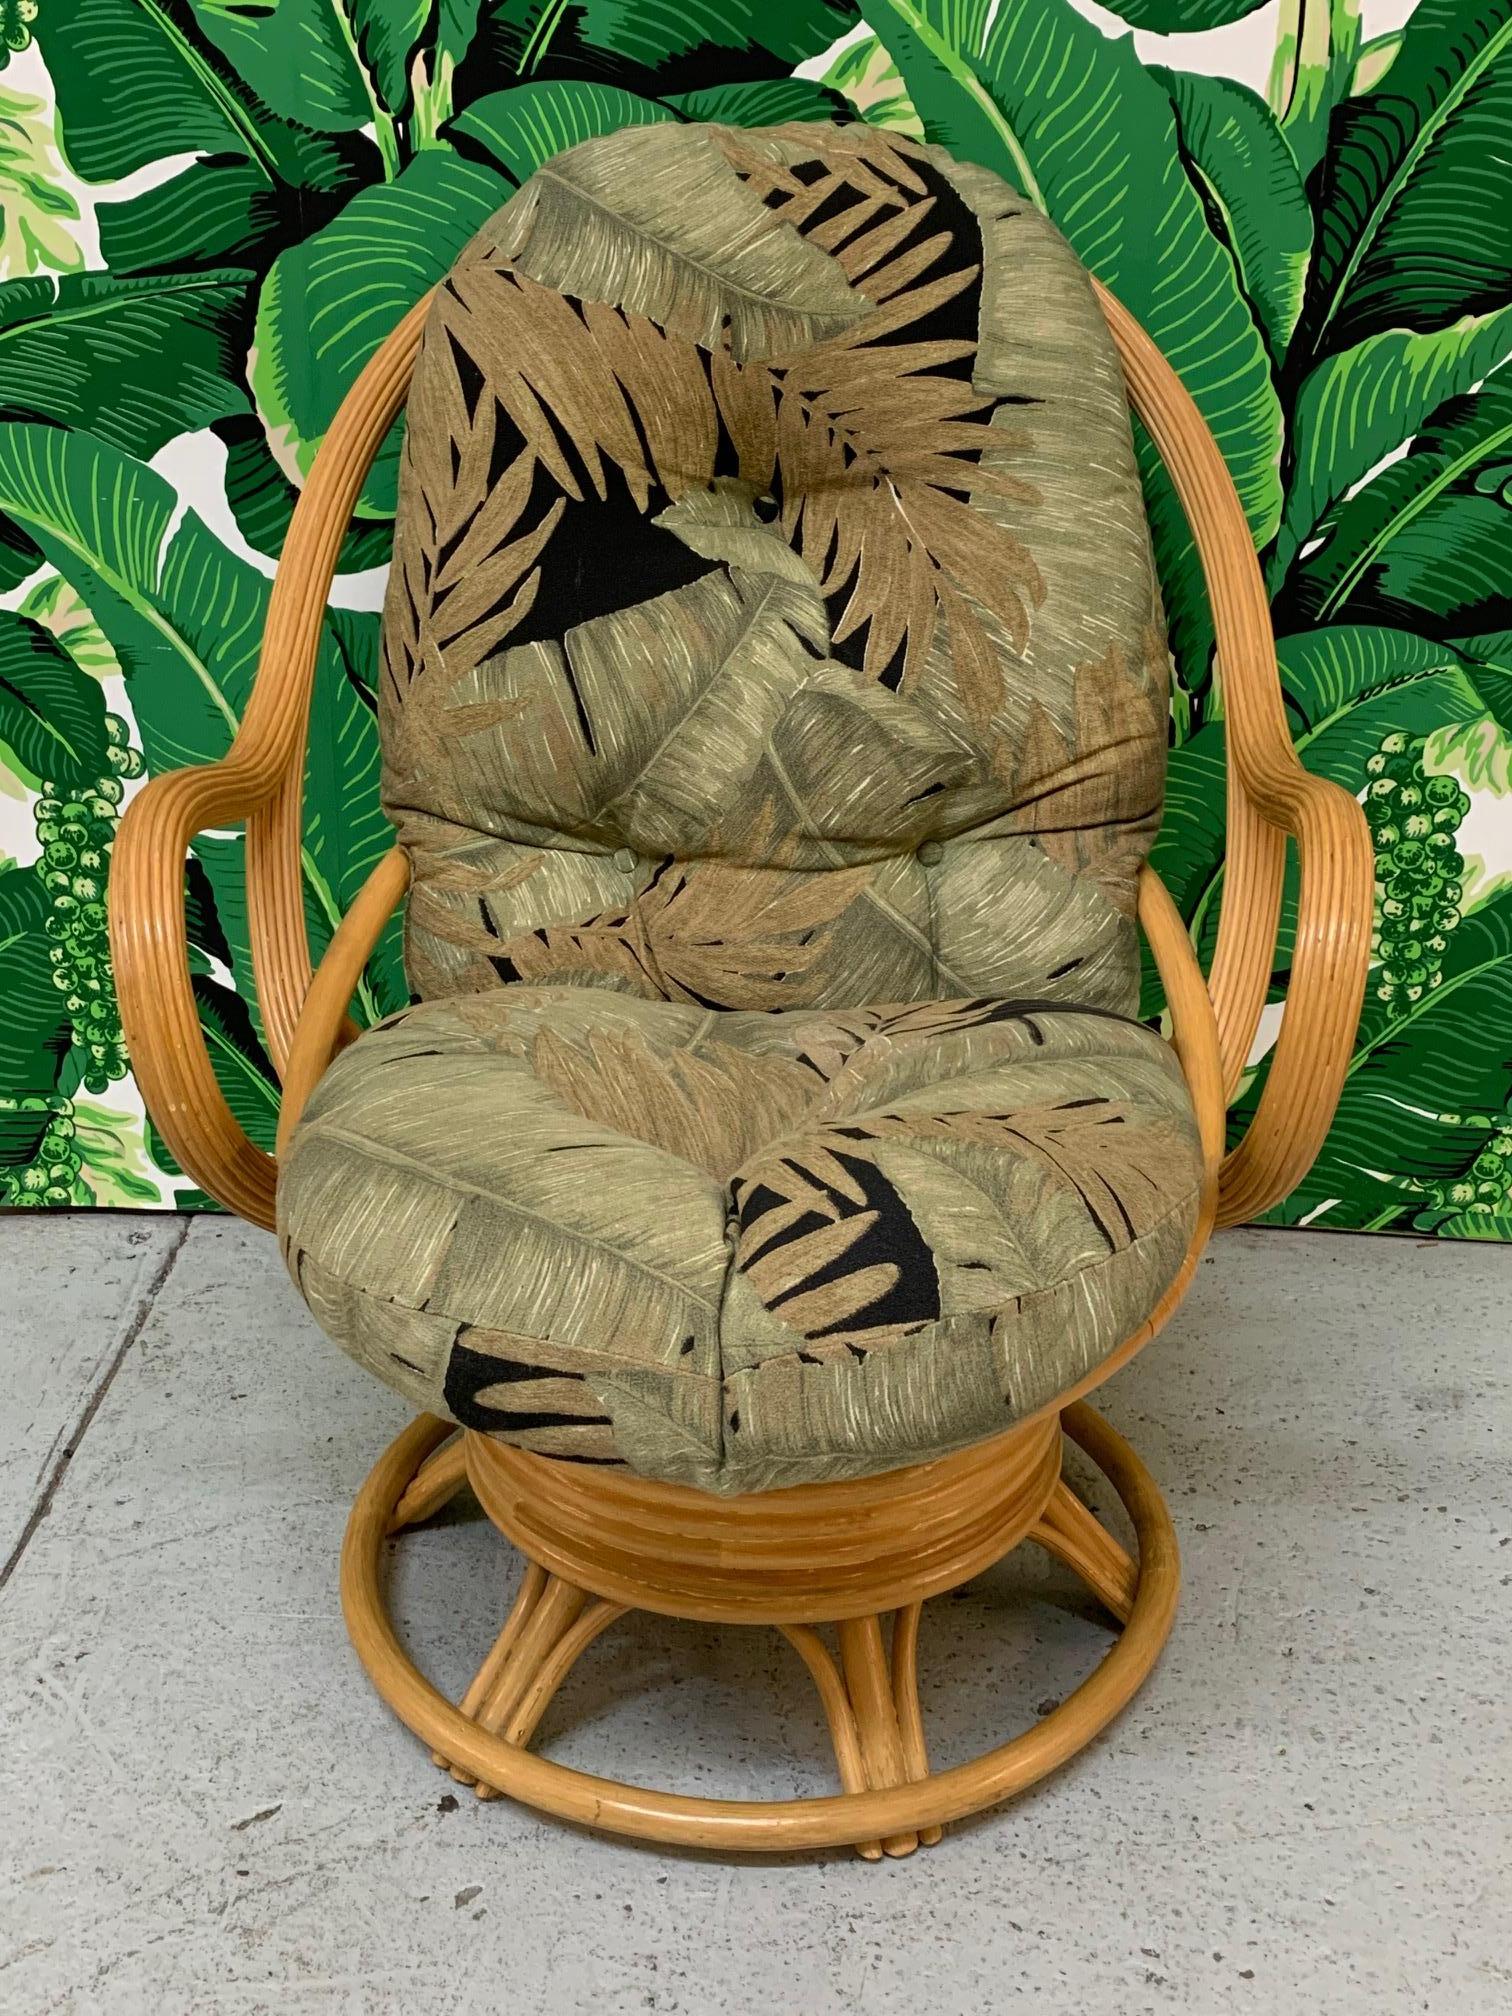 Rattan lounge chair features both swivel and rocking movement, and thick, comfortable upholstery in a tropical print, circa 1970s. Good vintage condition with minor imperfections consistent with age.